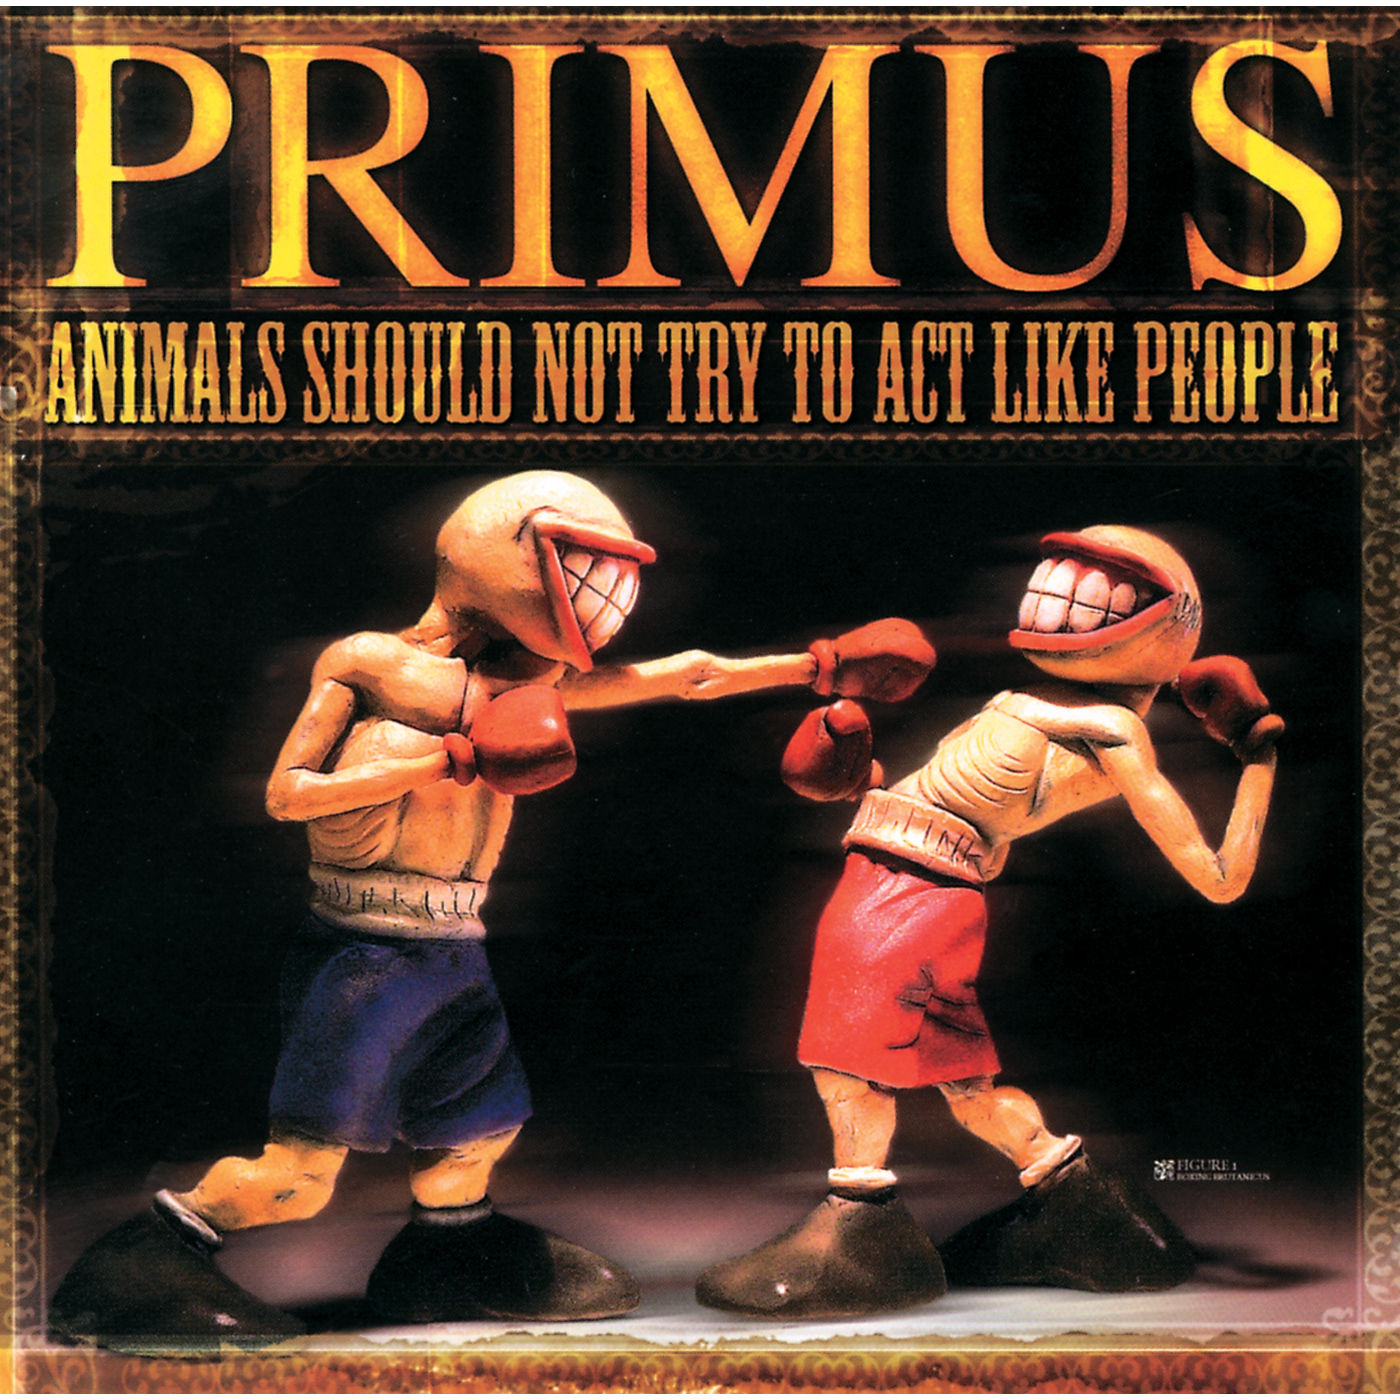 Primus – Animals Should Not Try To Act Like People (2003/2021) [FLAC 24bit/192kHz]